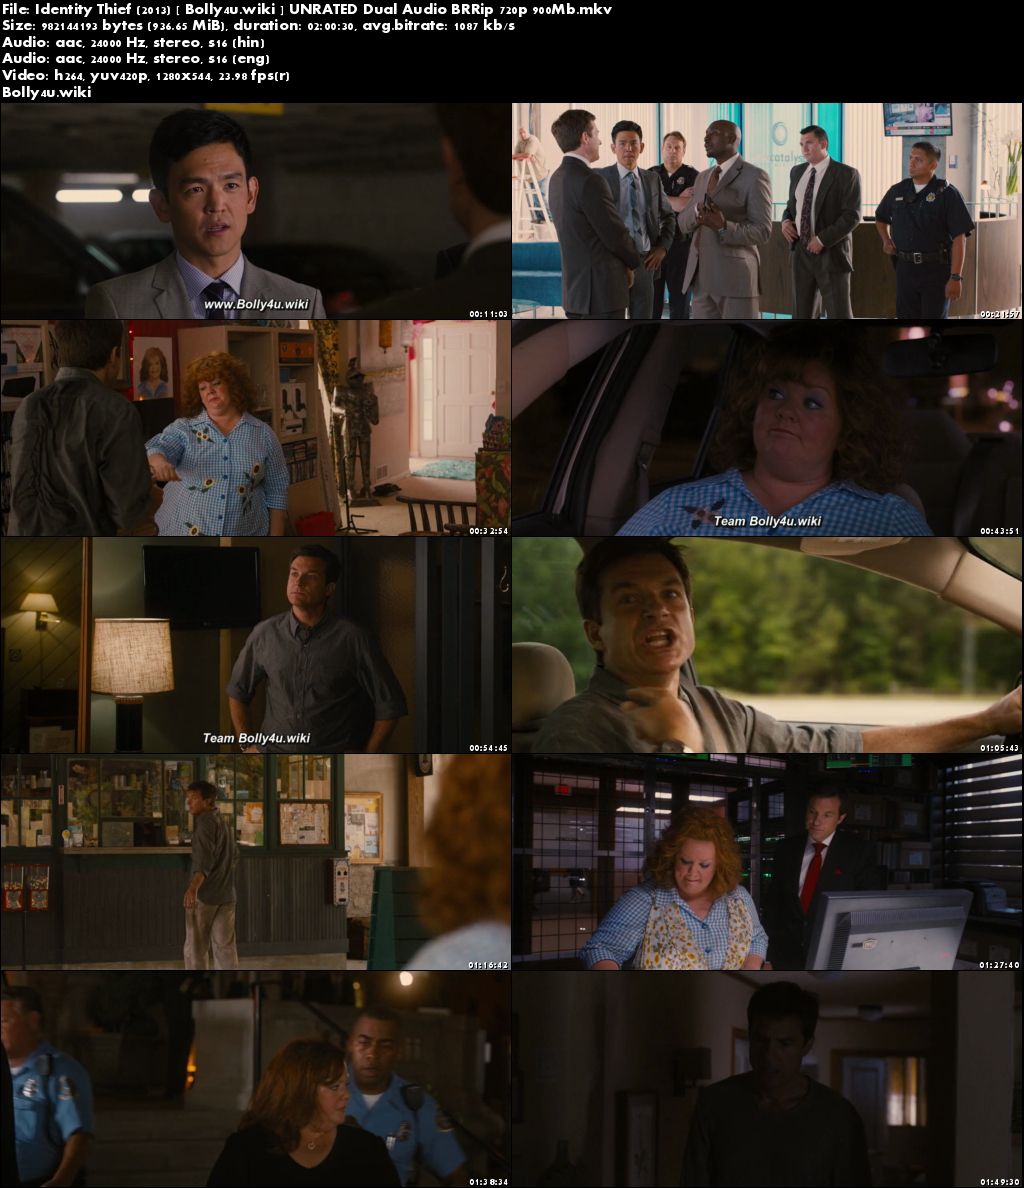 Identity Thief 2013 BRRip 350MB UNRATED Hindi Dual Audio 480p Download